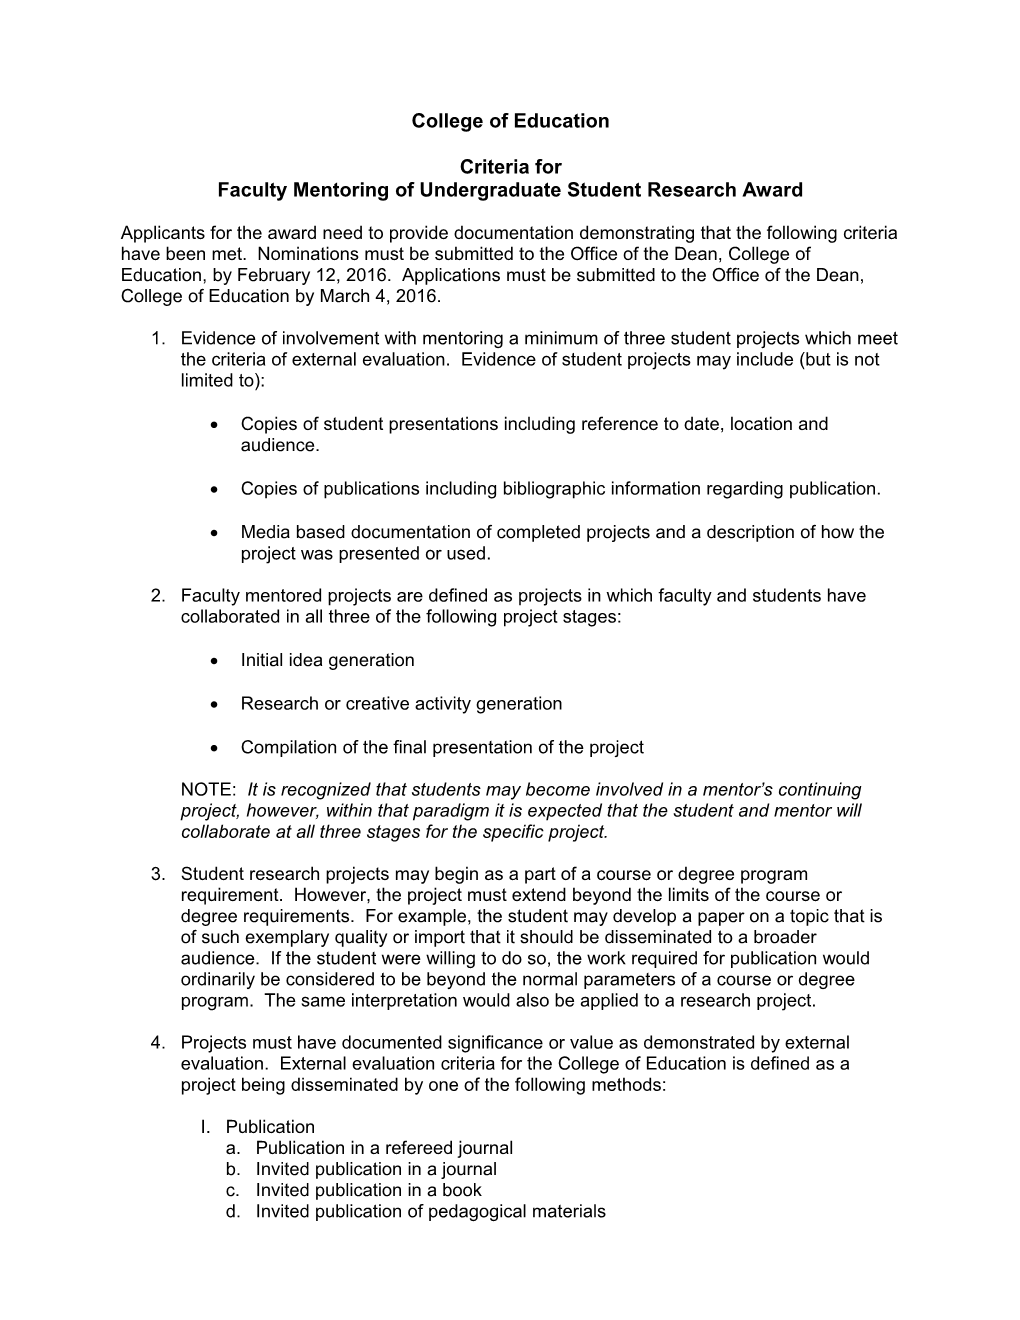 Faculty Mentoring of Undergraduate Student Research Award